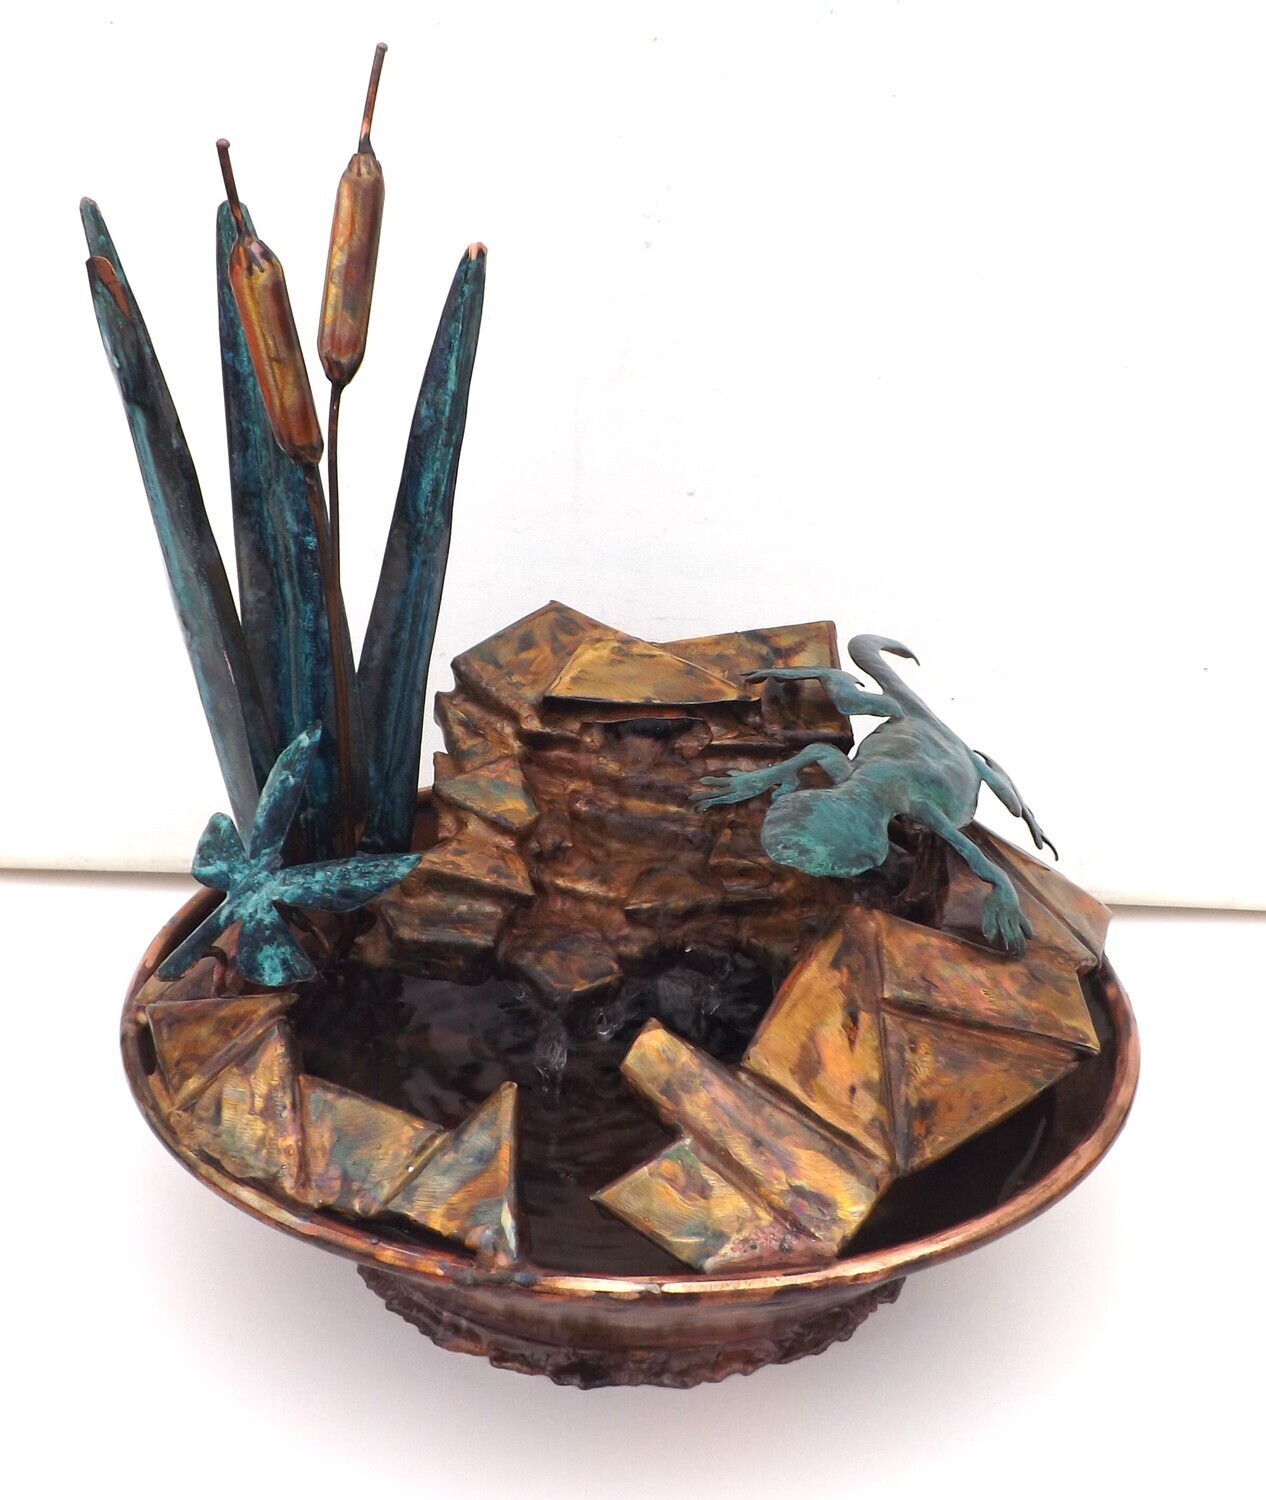 Gecko, Dragonfly and Cattails, Copper Rock Water Fountain, small table size (available/created by order, please see details for shipping/inventory)